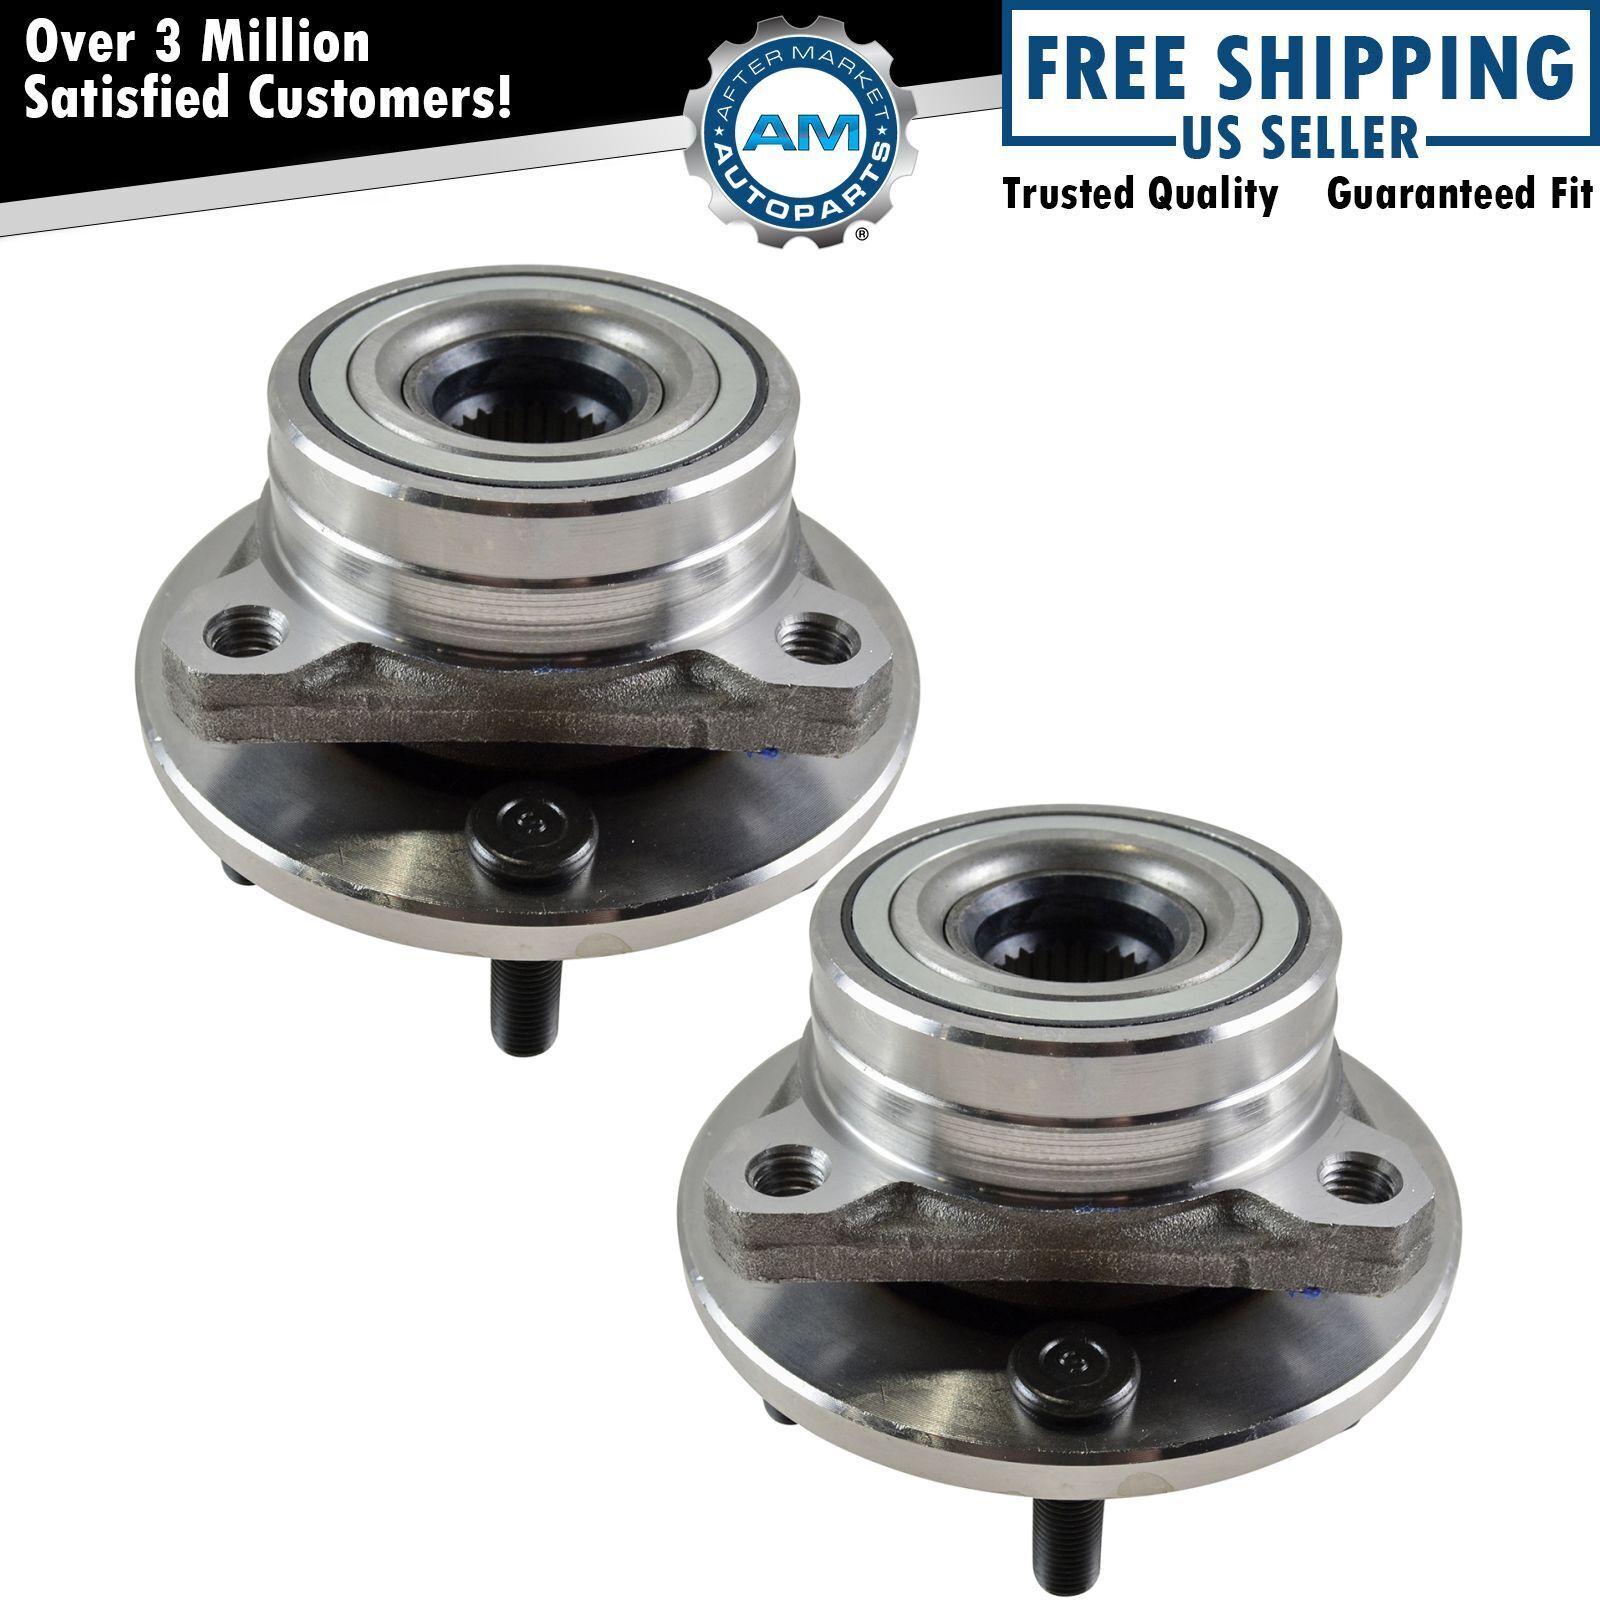 2 Front Wheel Bearing Hub Assembly Fits Ford Taurus Mercury Sable Continental